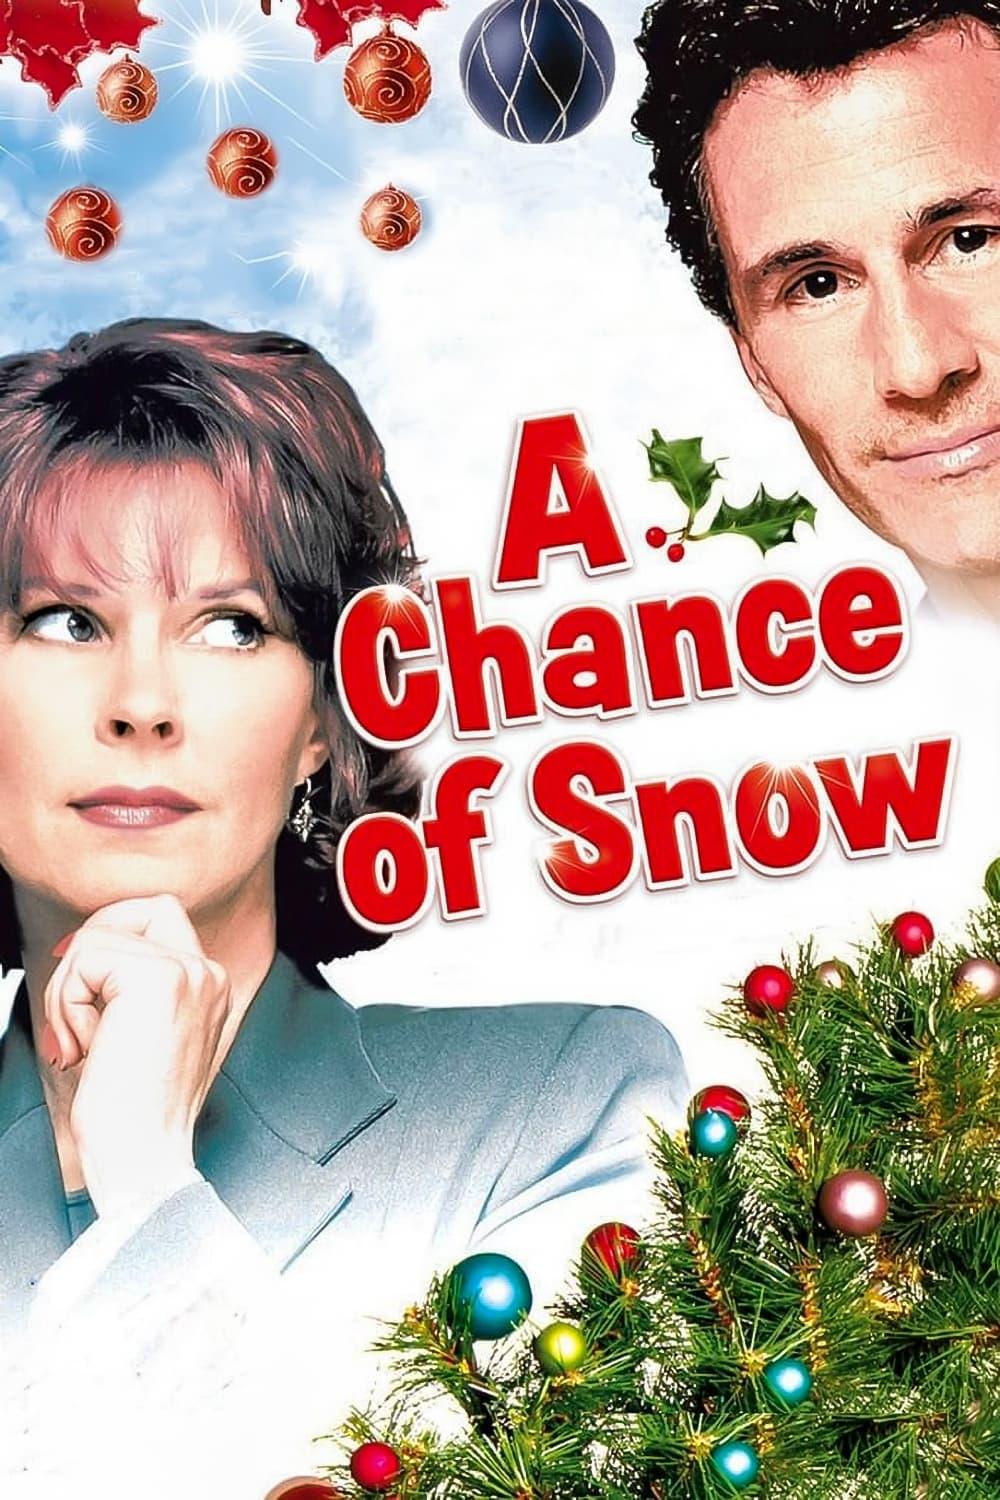 A Chance of Snow poster